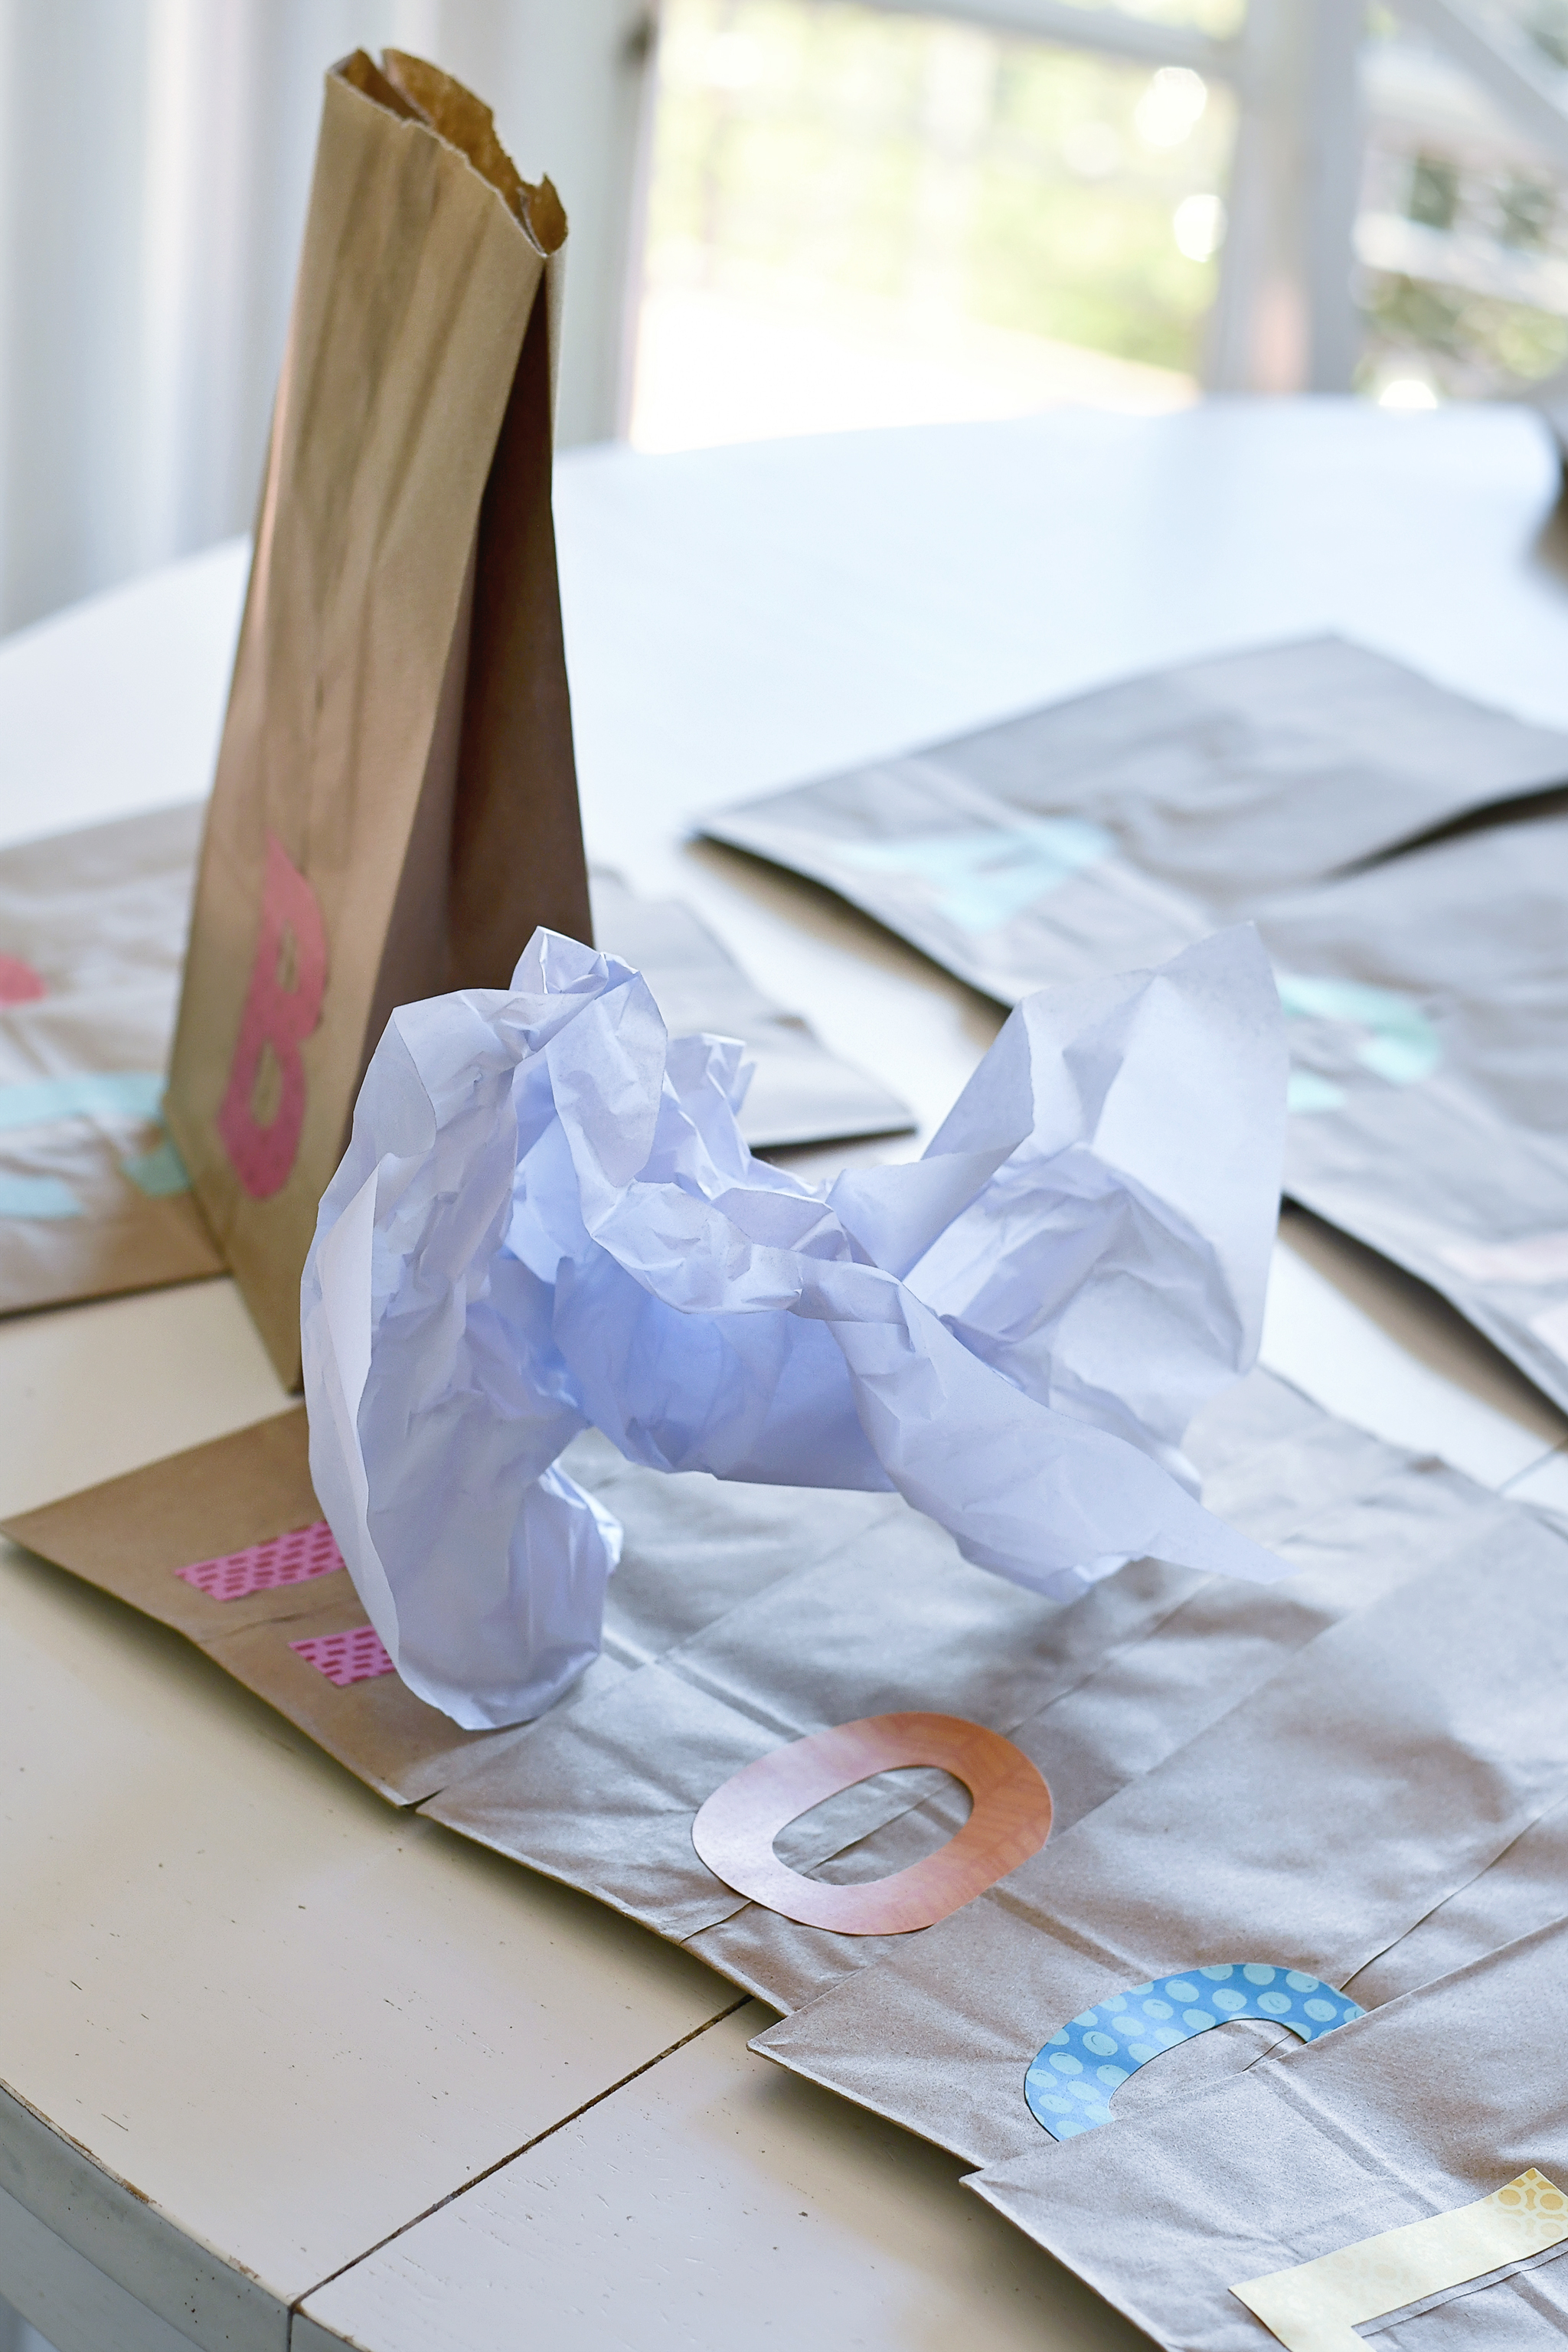 Fill each sack with 1/2 sheet of wadded up tissue paper